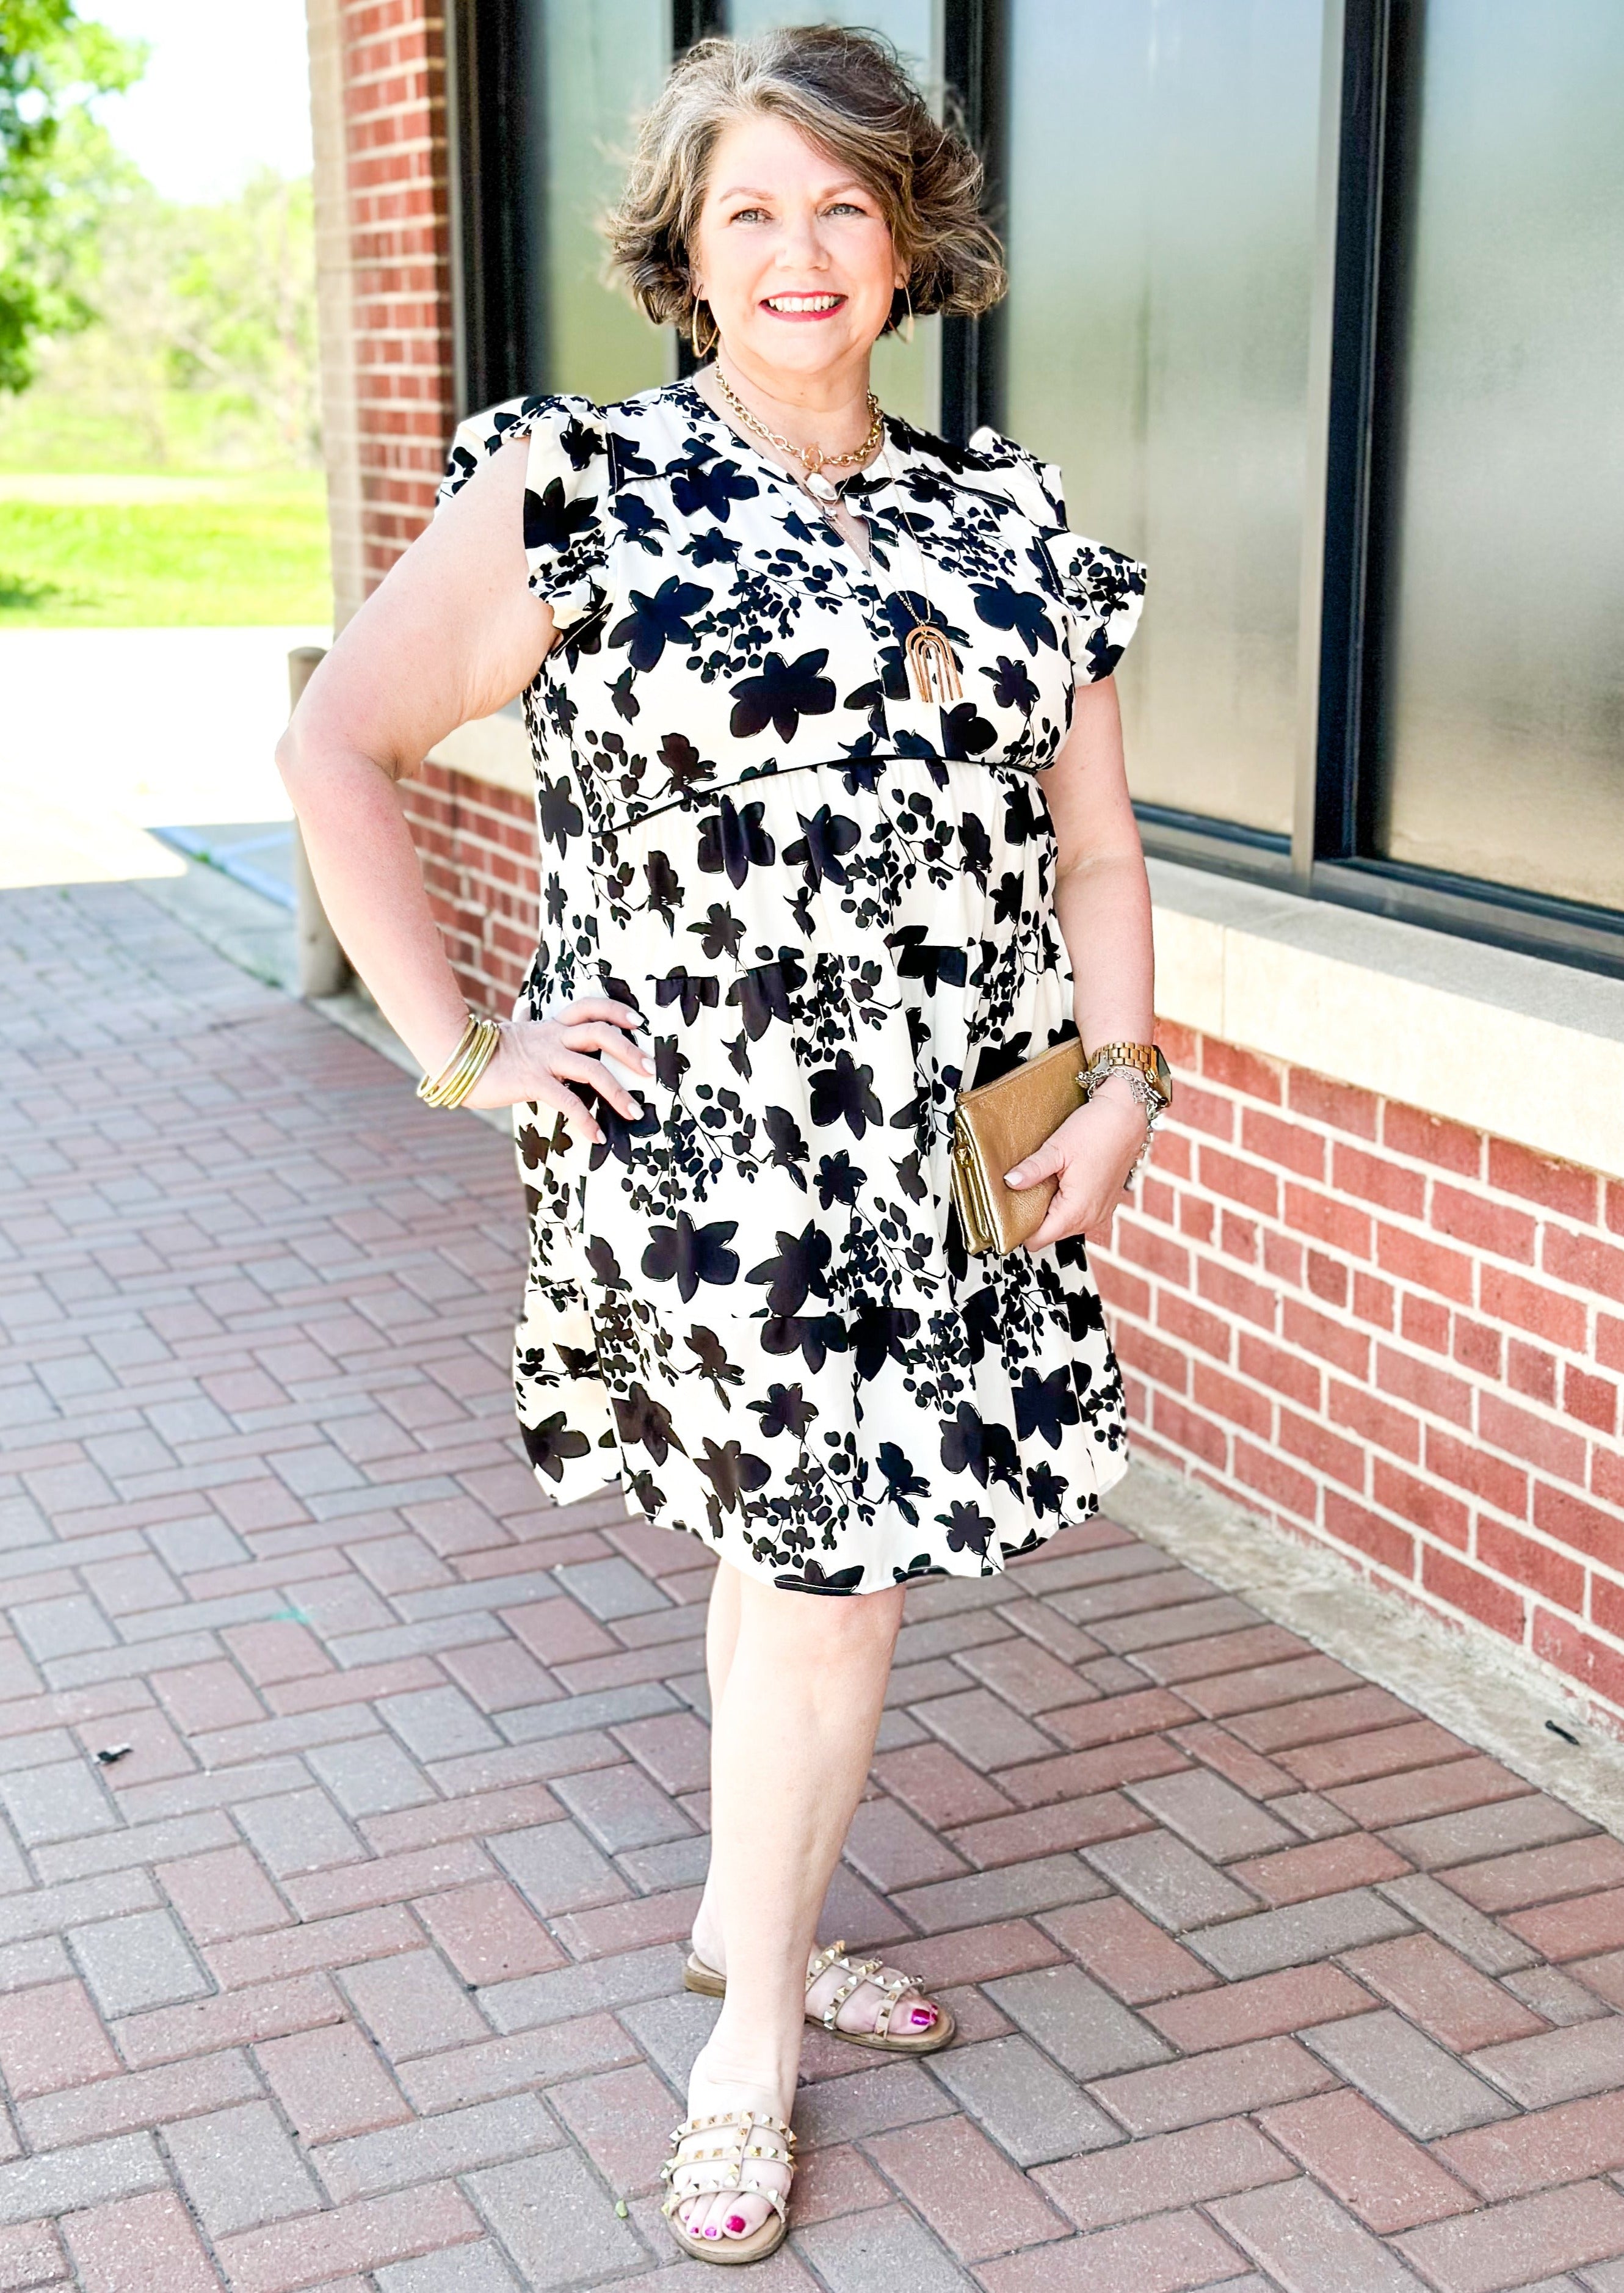 Cream with black floral pattern dress - short ruffle sleeve - v-neck - tiered - black piping just below bust